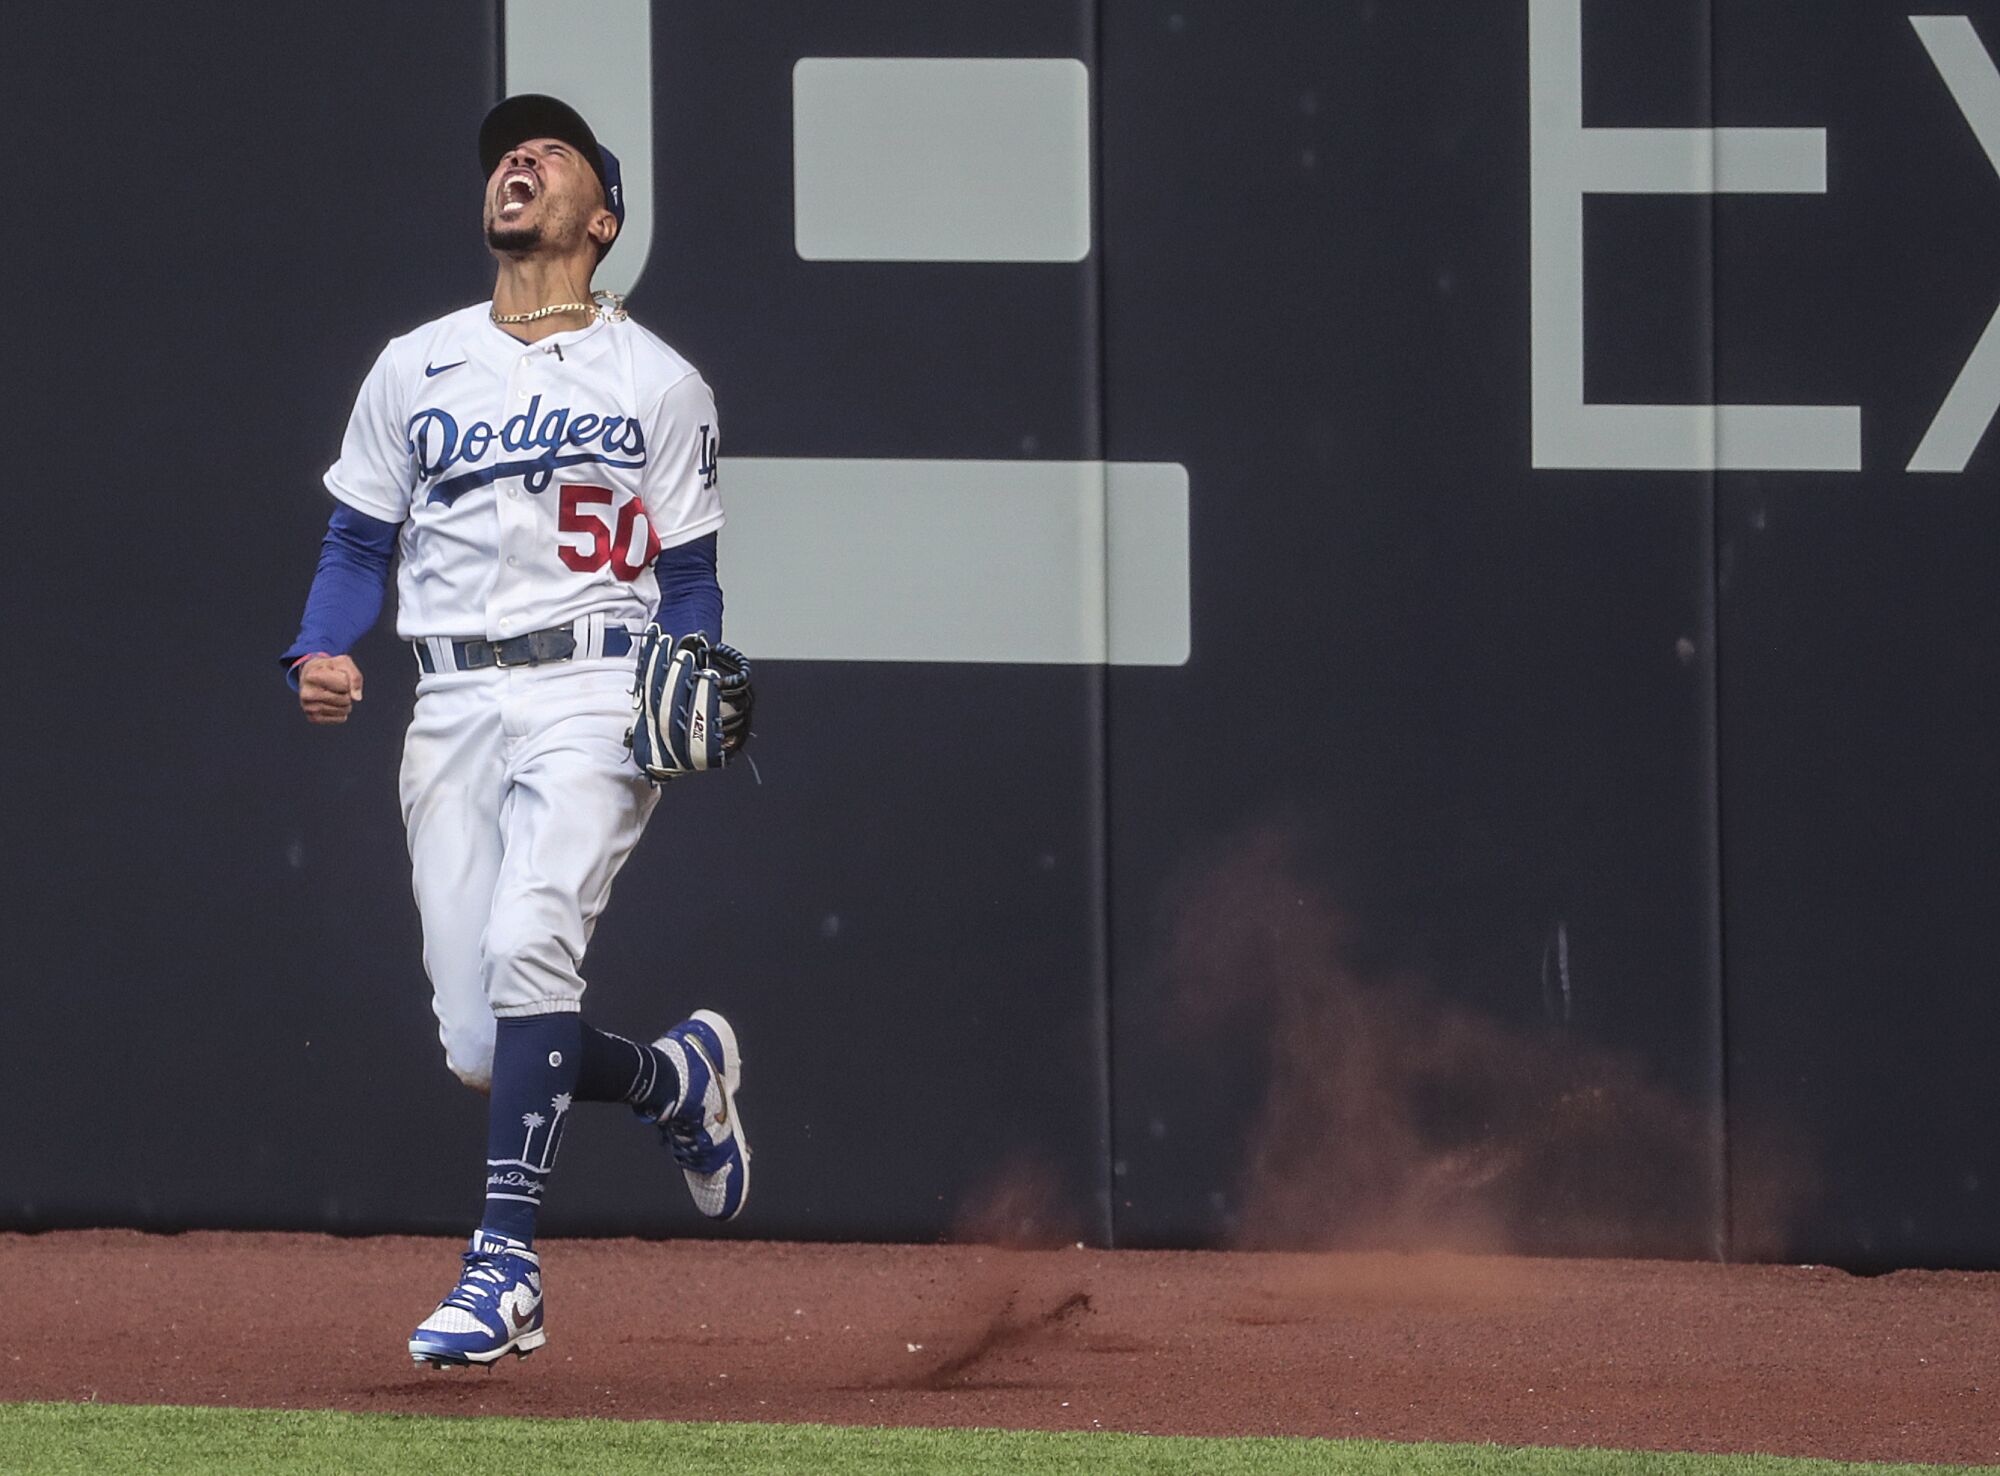 Dodgers right fielder Mookie Betts celebrates after leaping to catch a Marcell Ozuna.